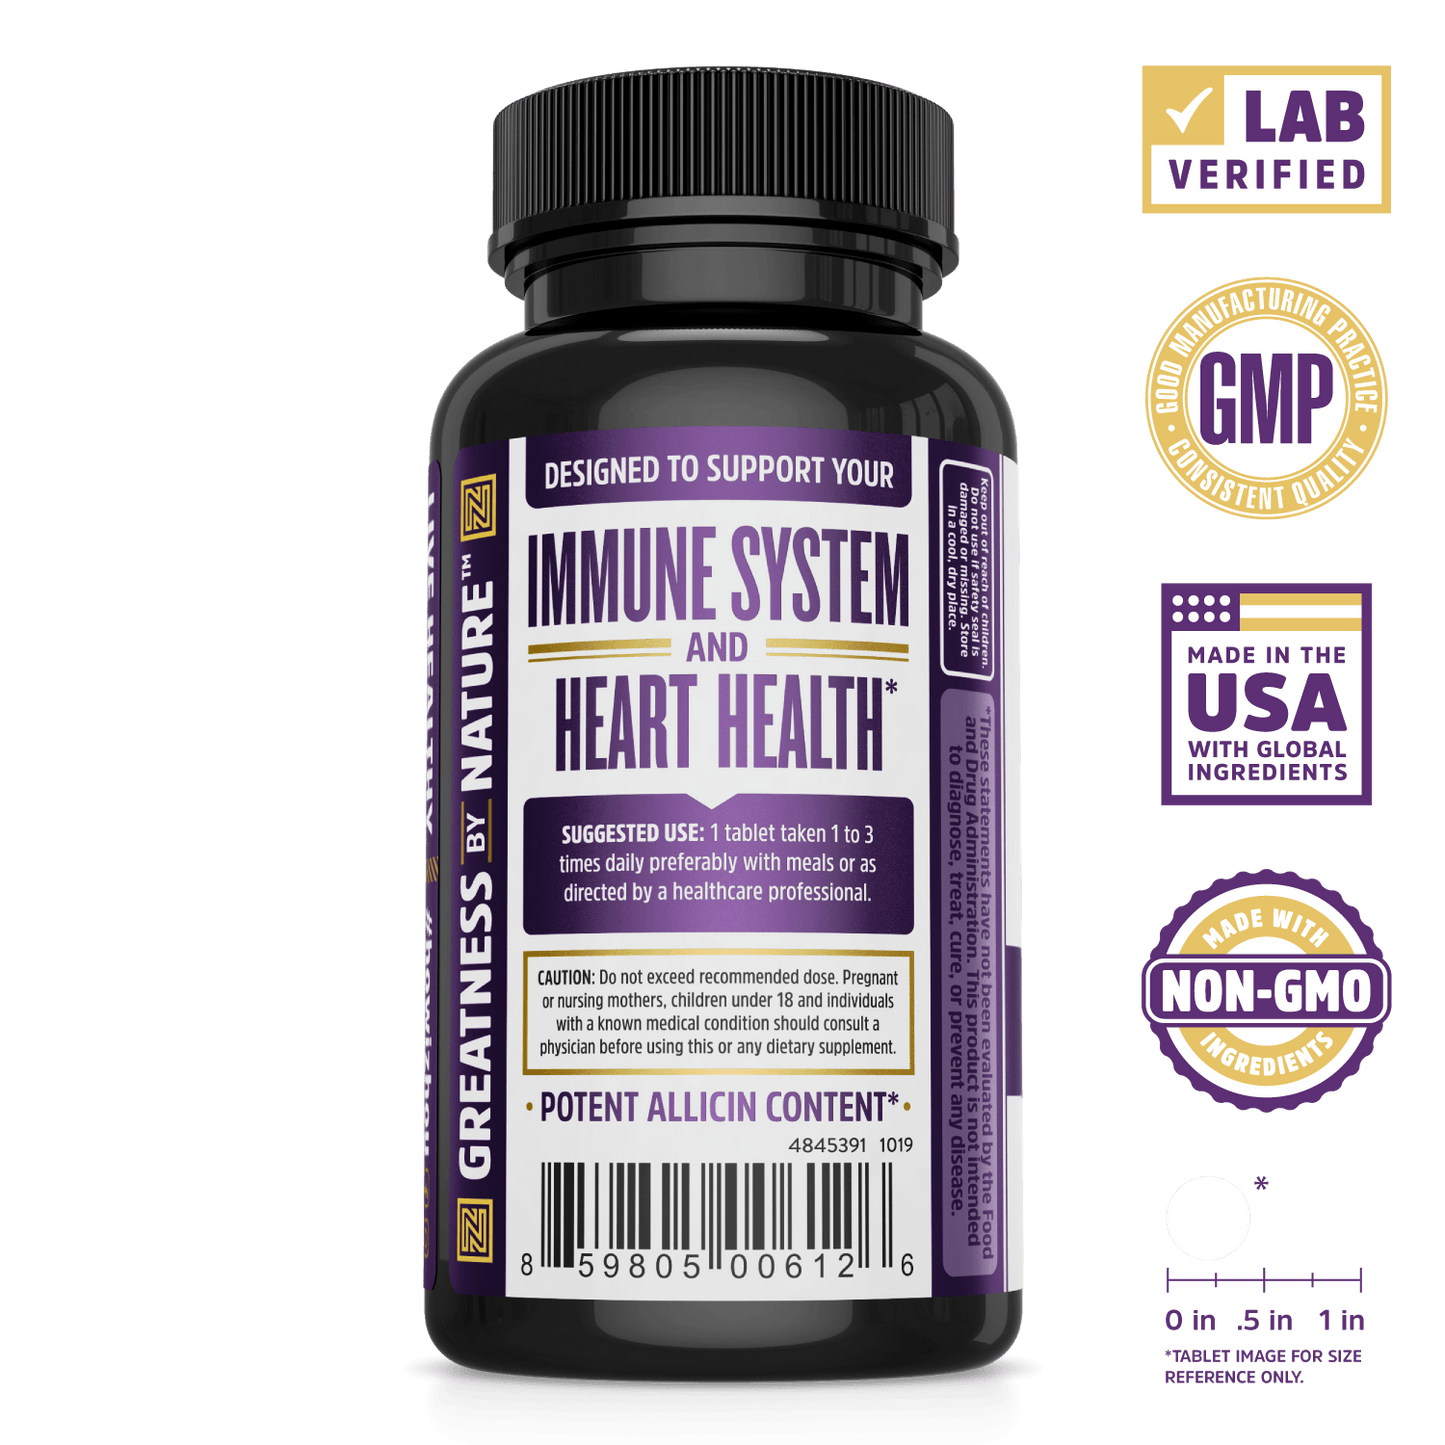 Extra Strength Garlic with Allicin from Zhou Nutrition. Lab verified, good manufacturing practices, made in the USA with global ingredients, made with non-GMO ingredients